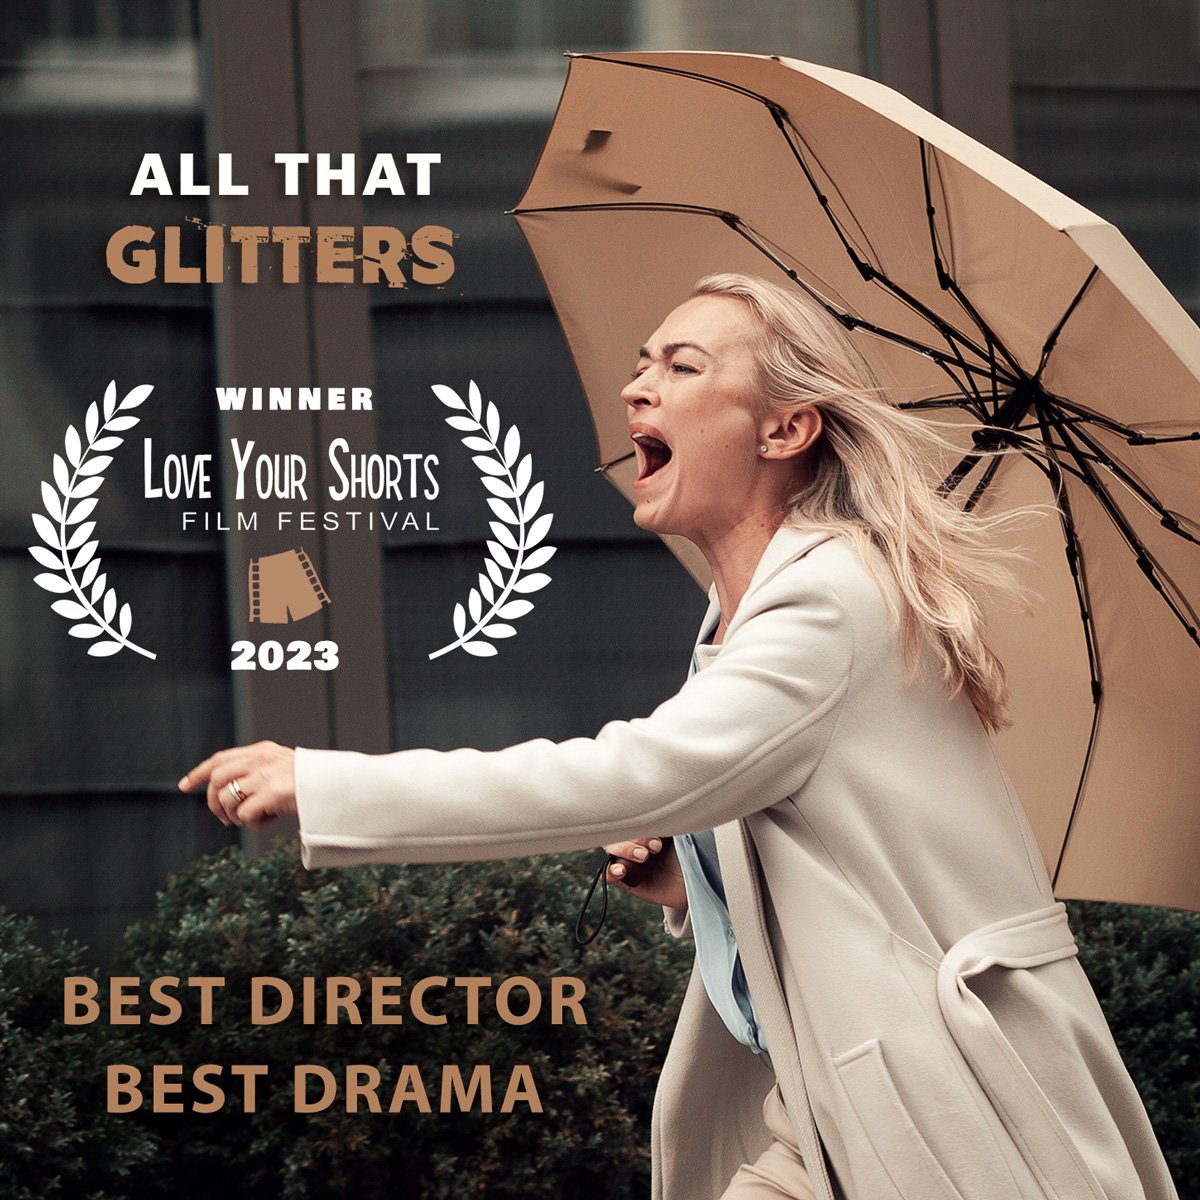 Delighted to announce #AllThatGlitters has picked up two awards at Love Your Shorts Film Festival in Florida!  

BEST DIRECTOR @DanBronzite and BEST DRAMA !!

#shortfilm #britfilm #ukfilm #prrequest #indiefilm